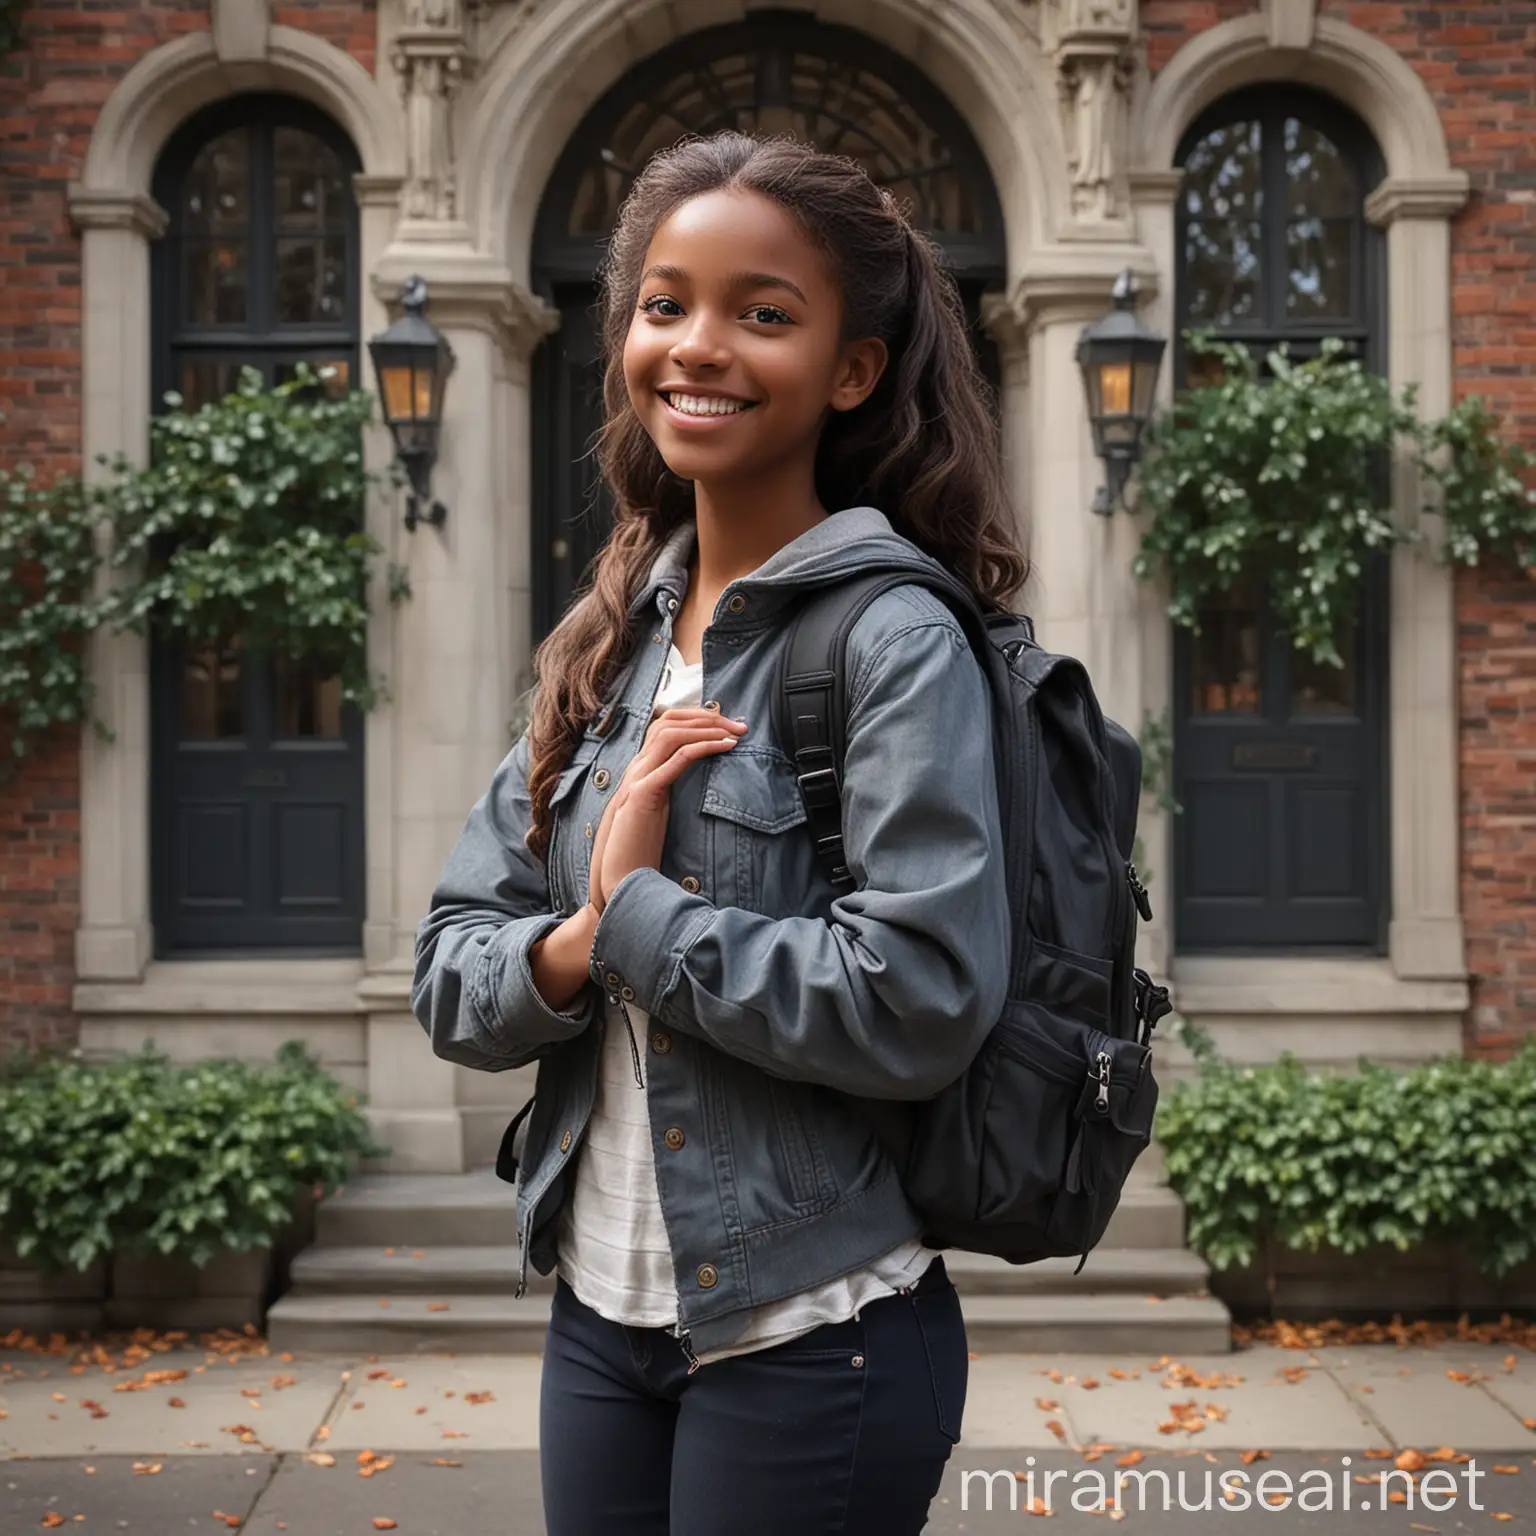 Half pose very beautiful realistic dark girl with backpack in front of an ivy League building. She eludes confidence with a simple decent dressing. Very detailed, she is facing the camera with a bright smile on her face. Her hands are crossed in an authentic pose